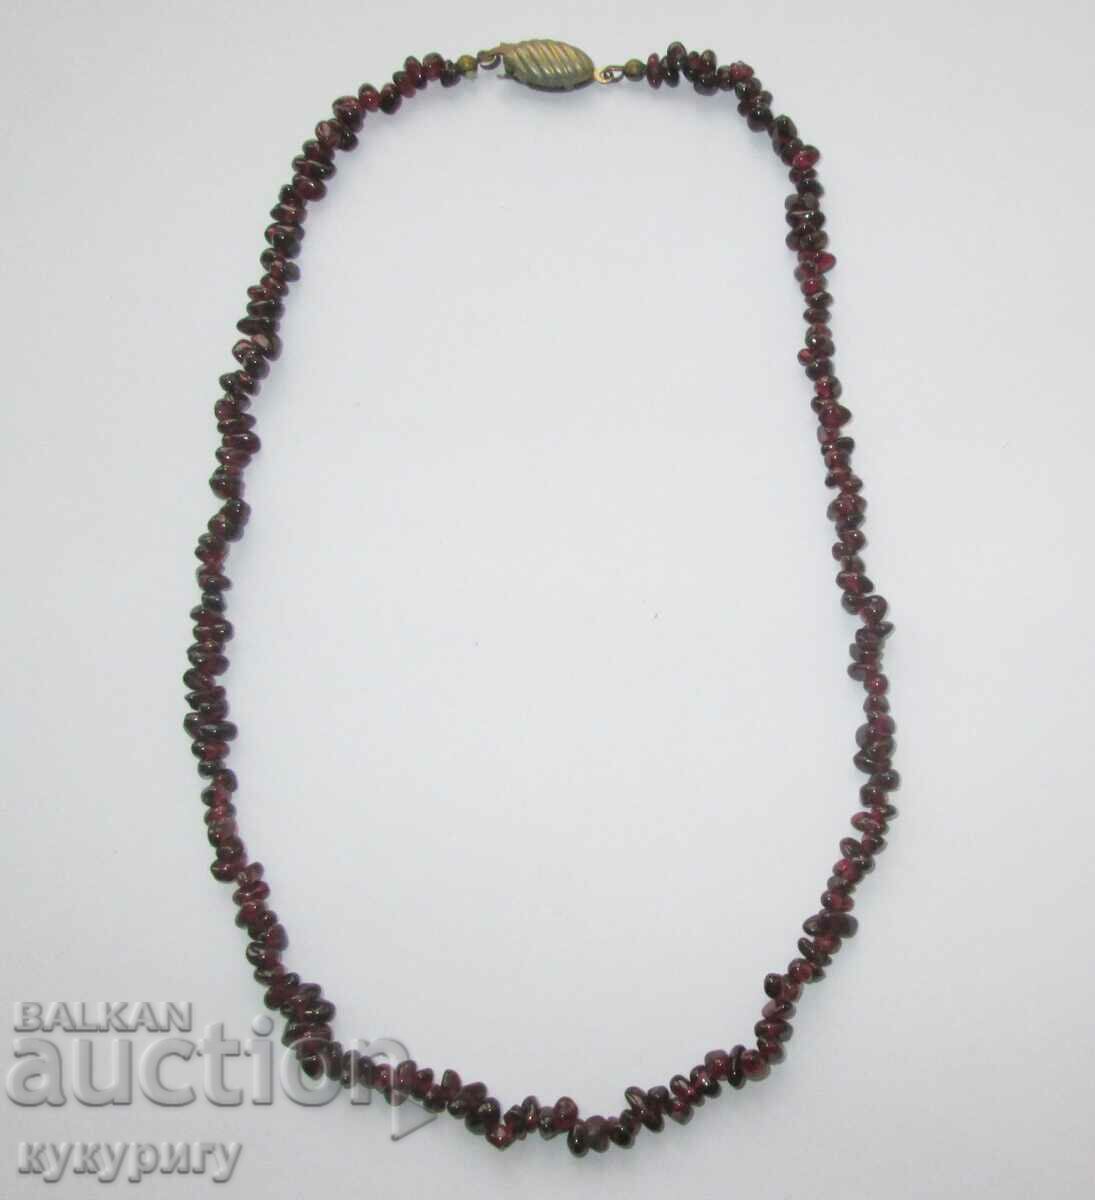 Old delicate women's necklace necklace made of natural garnets